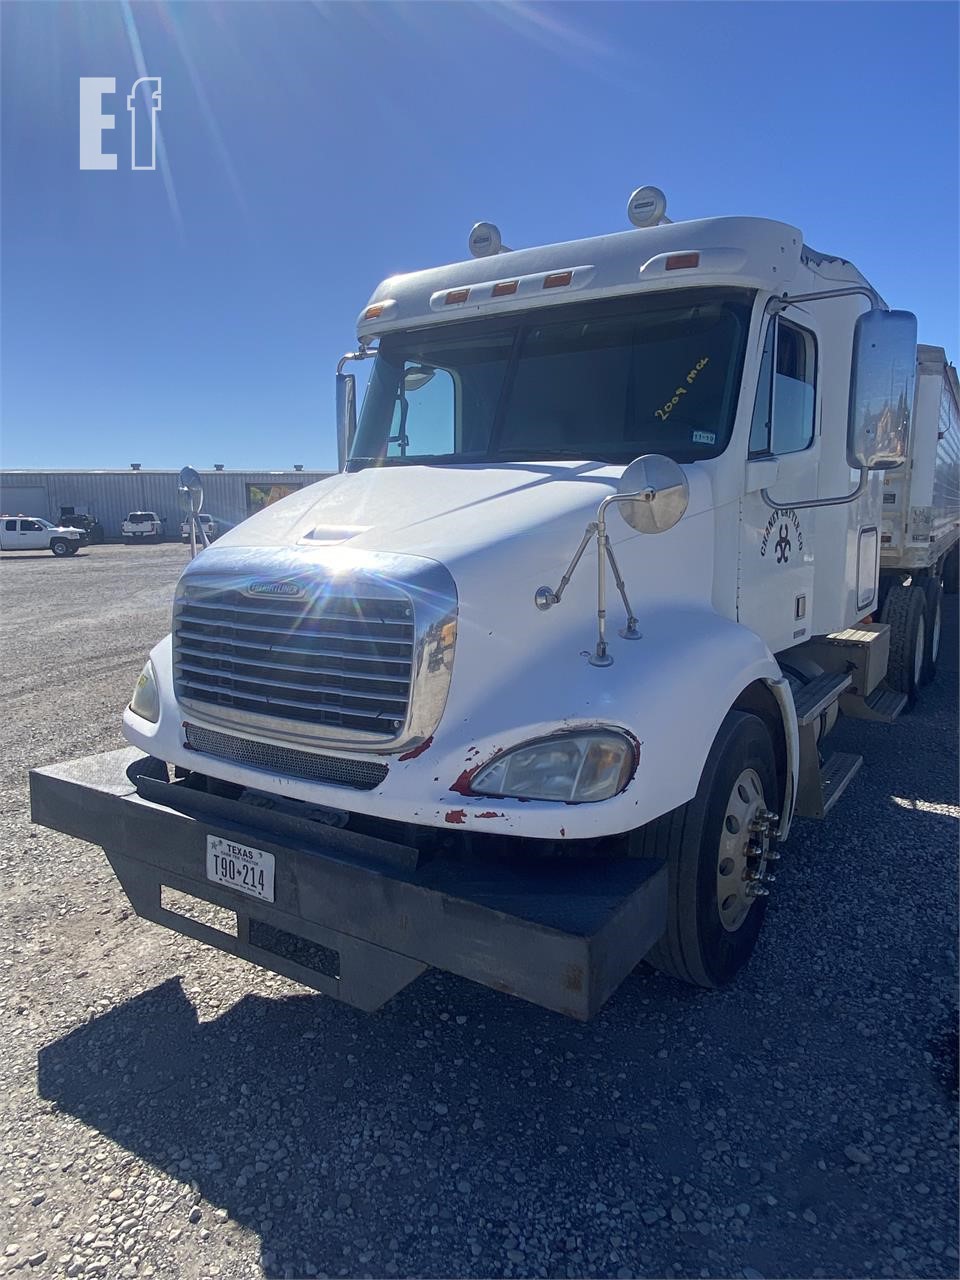 FREIGHTLINER Other Online Auctions - 16 Listings | EquipmentFacts